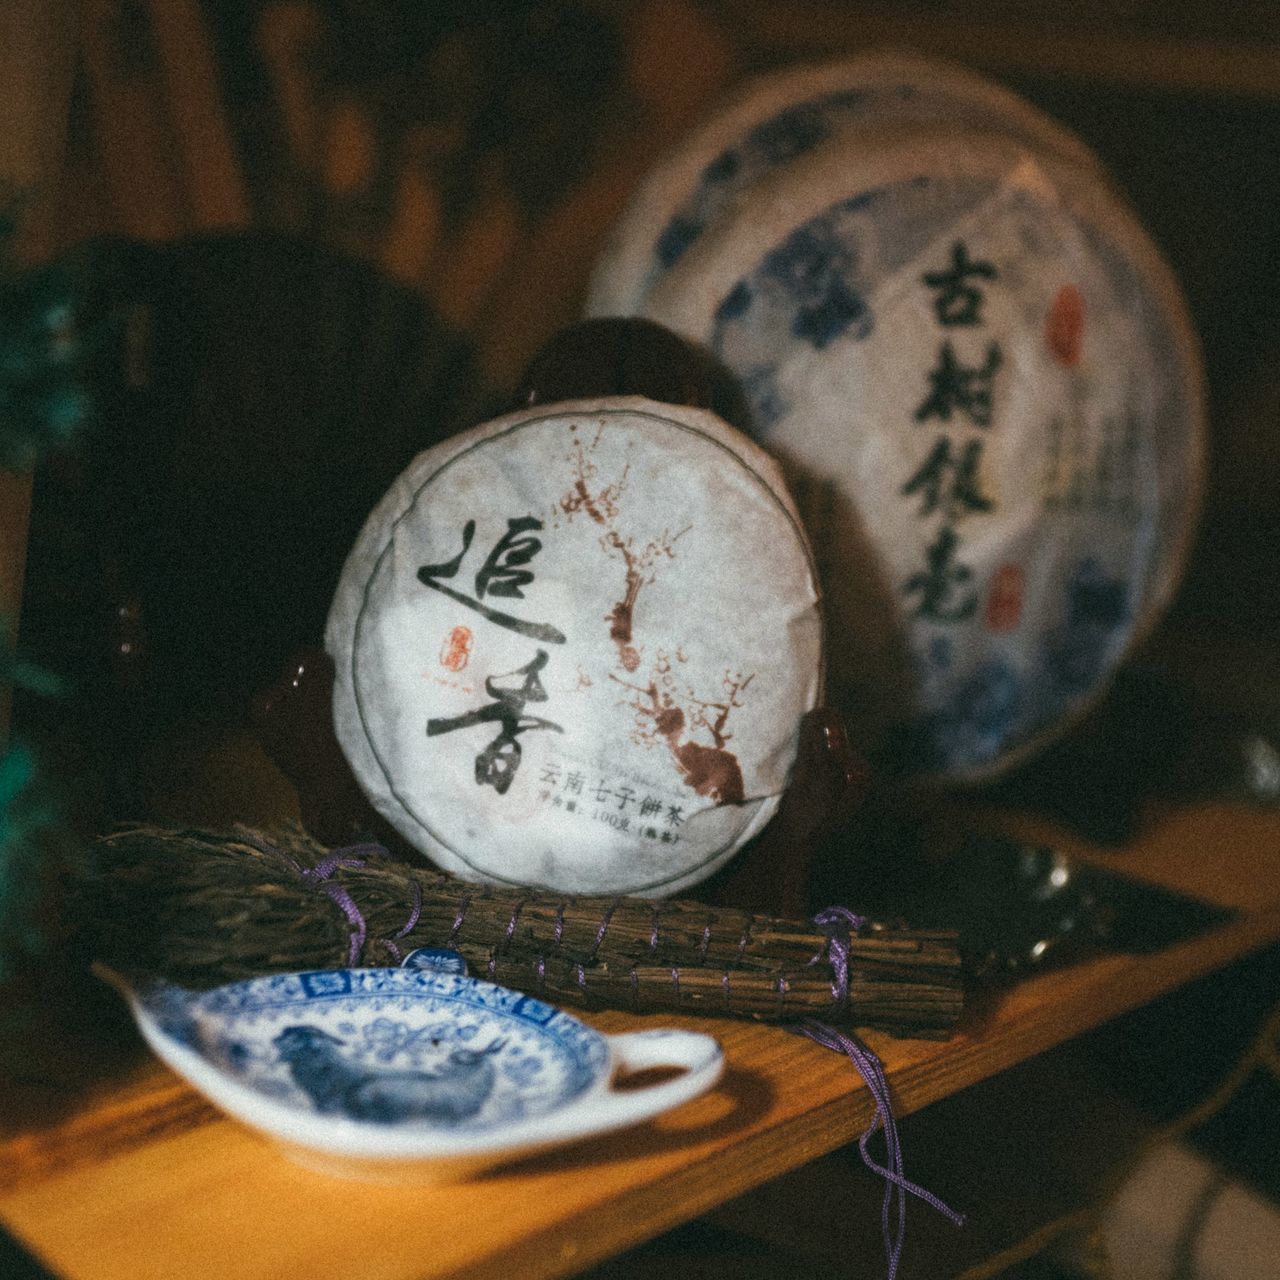 indoors, close-up, no people, text, number, focus on foreground, communication, selective focus, still life, western script, food and drink, clock, table, art and craft, old, accuracy, food, shape, time, minute hand